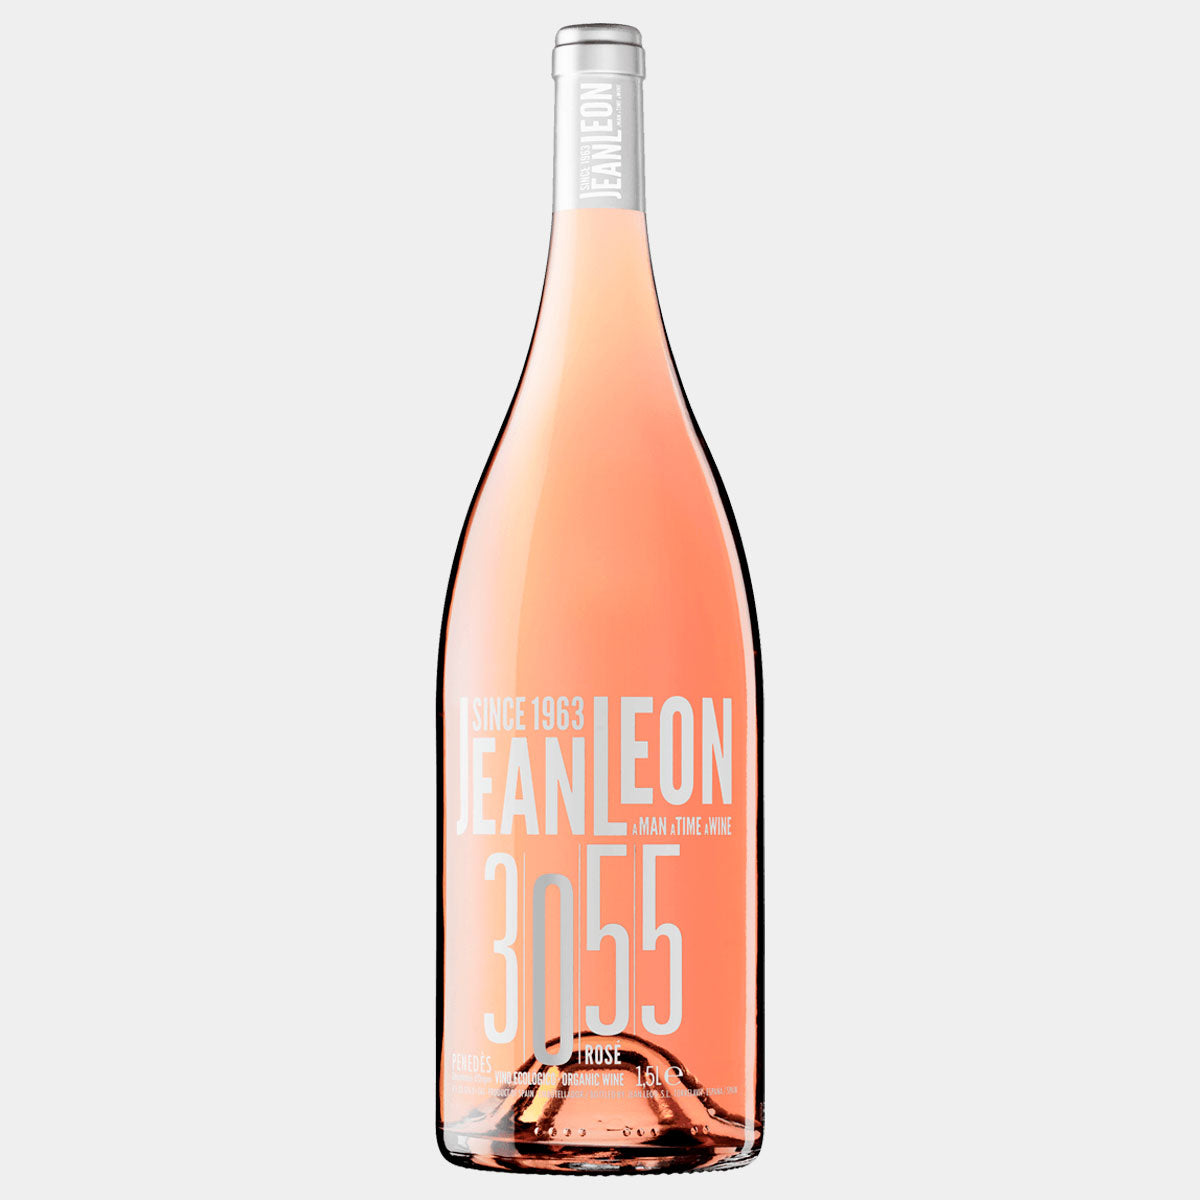 Jean Leon 3055 Rose - Wines and Copas Barcelona